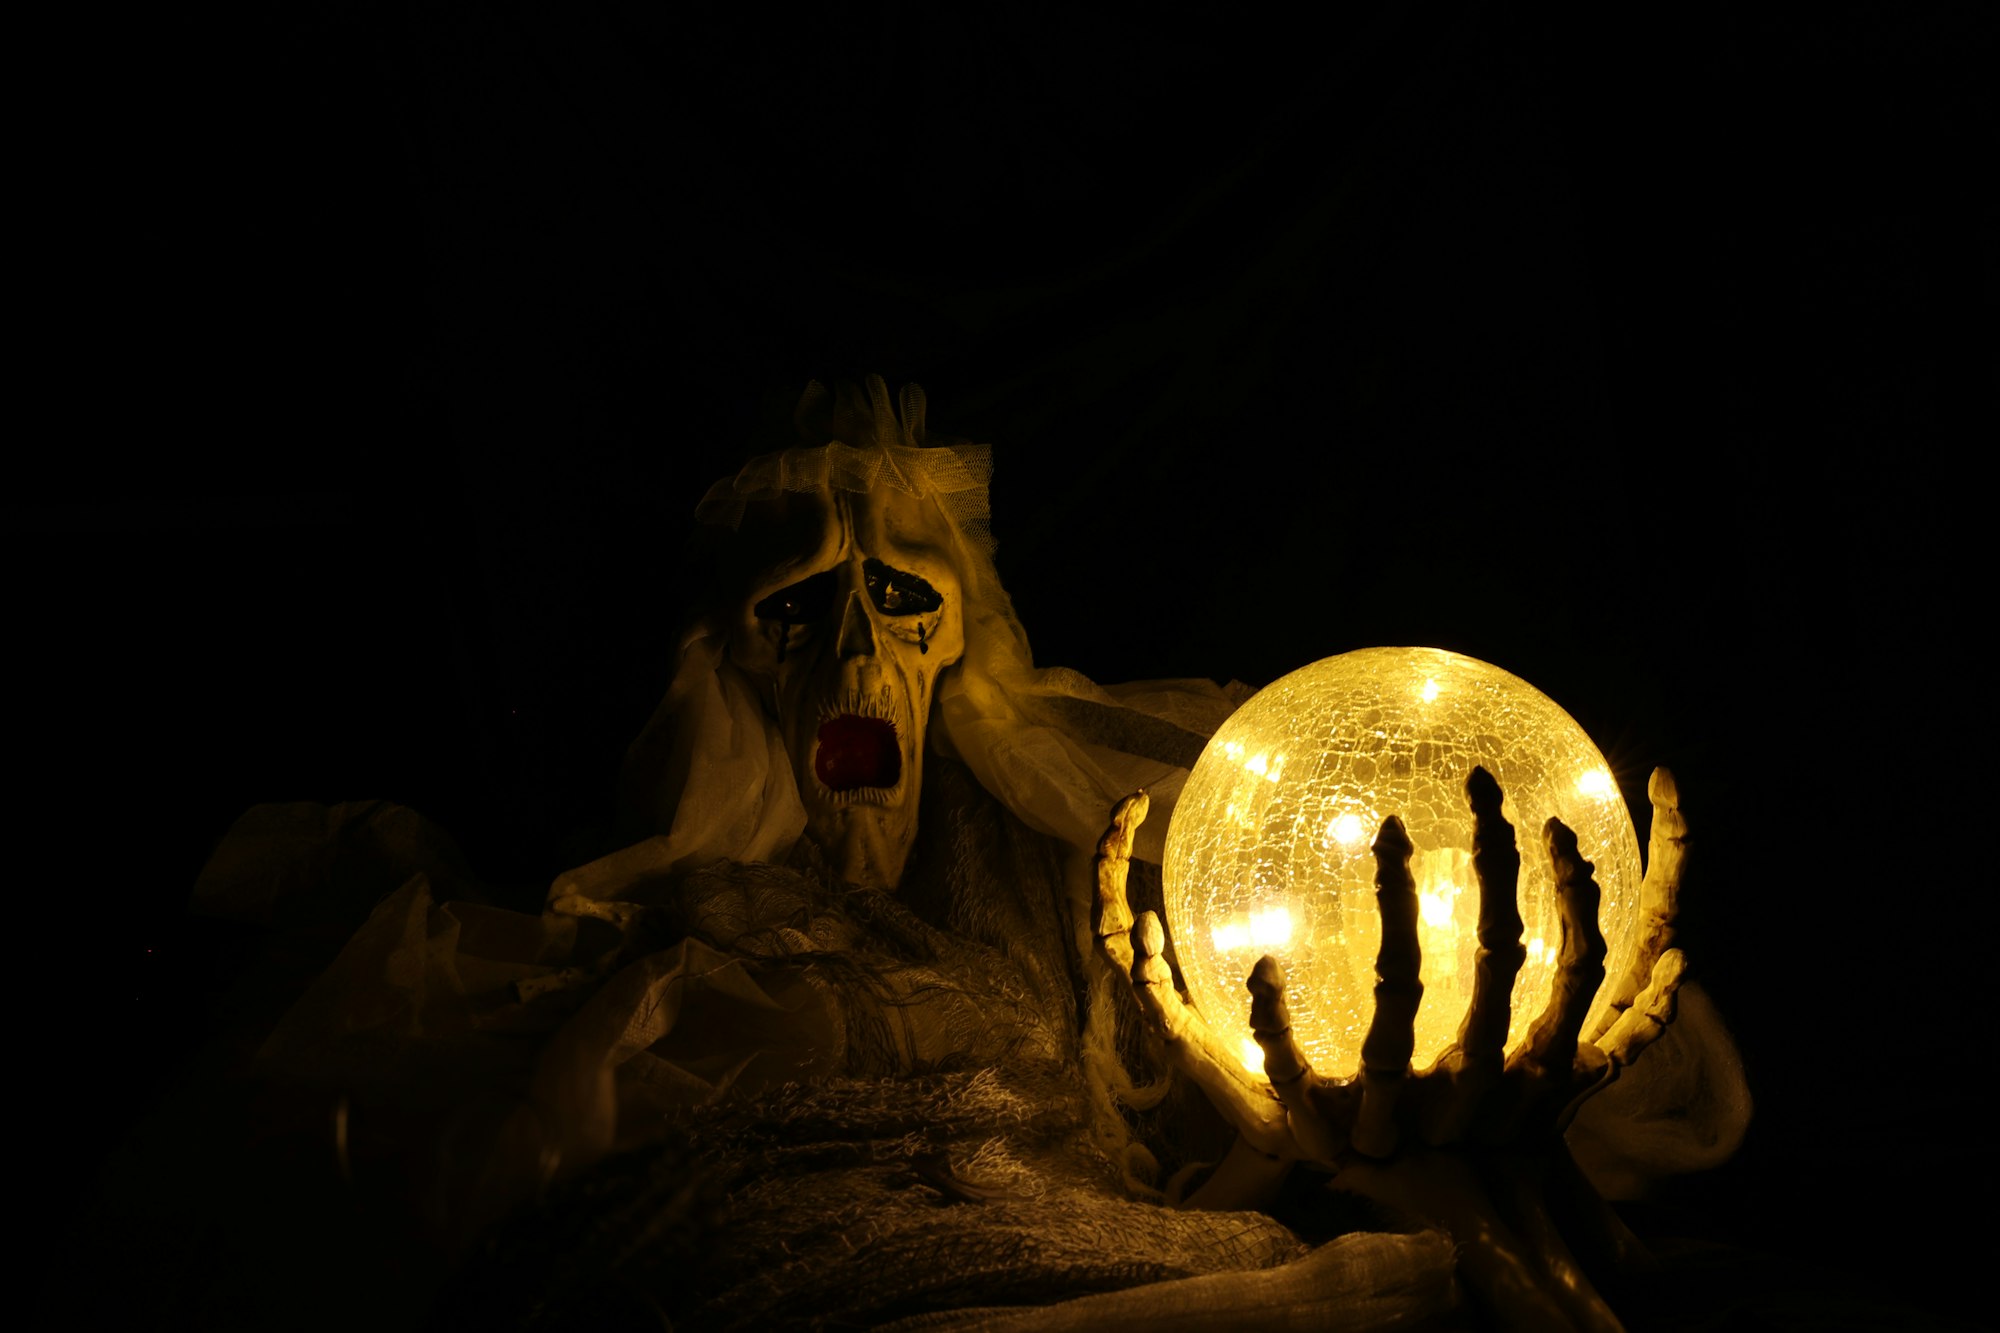 a skeletal figure holding a brightly light orb